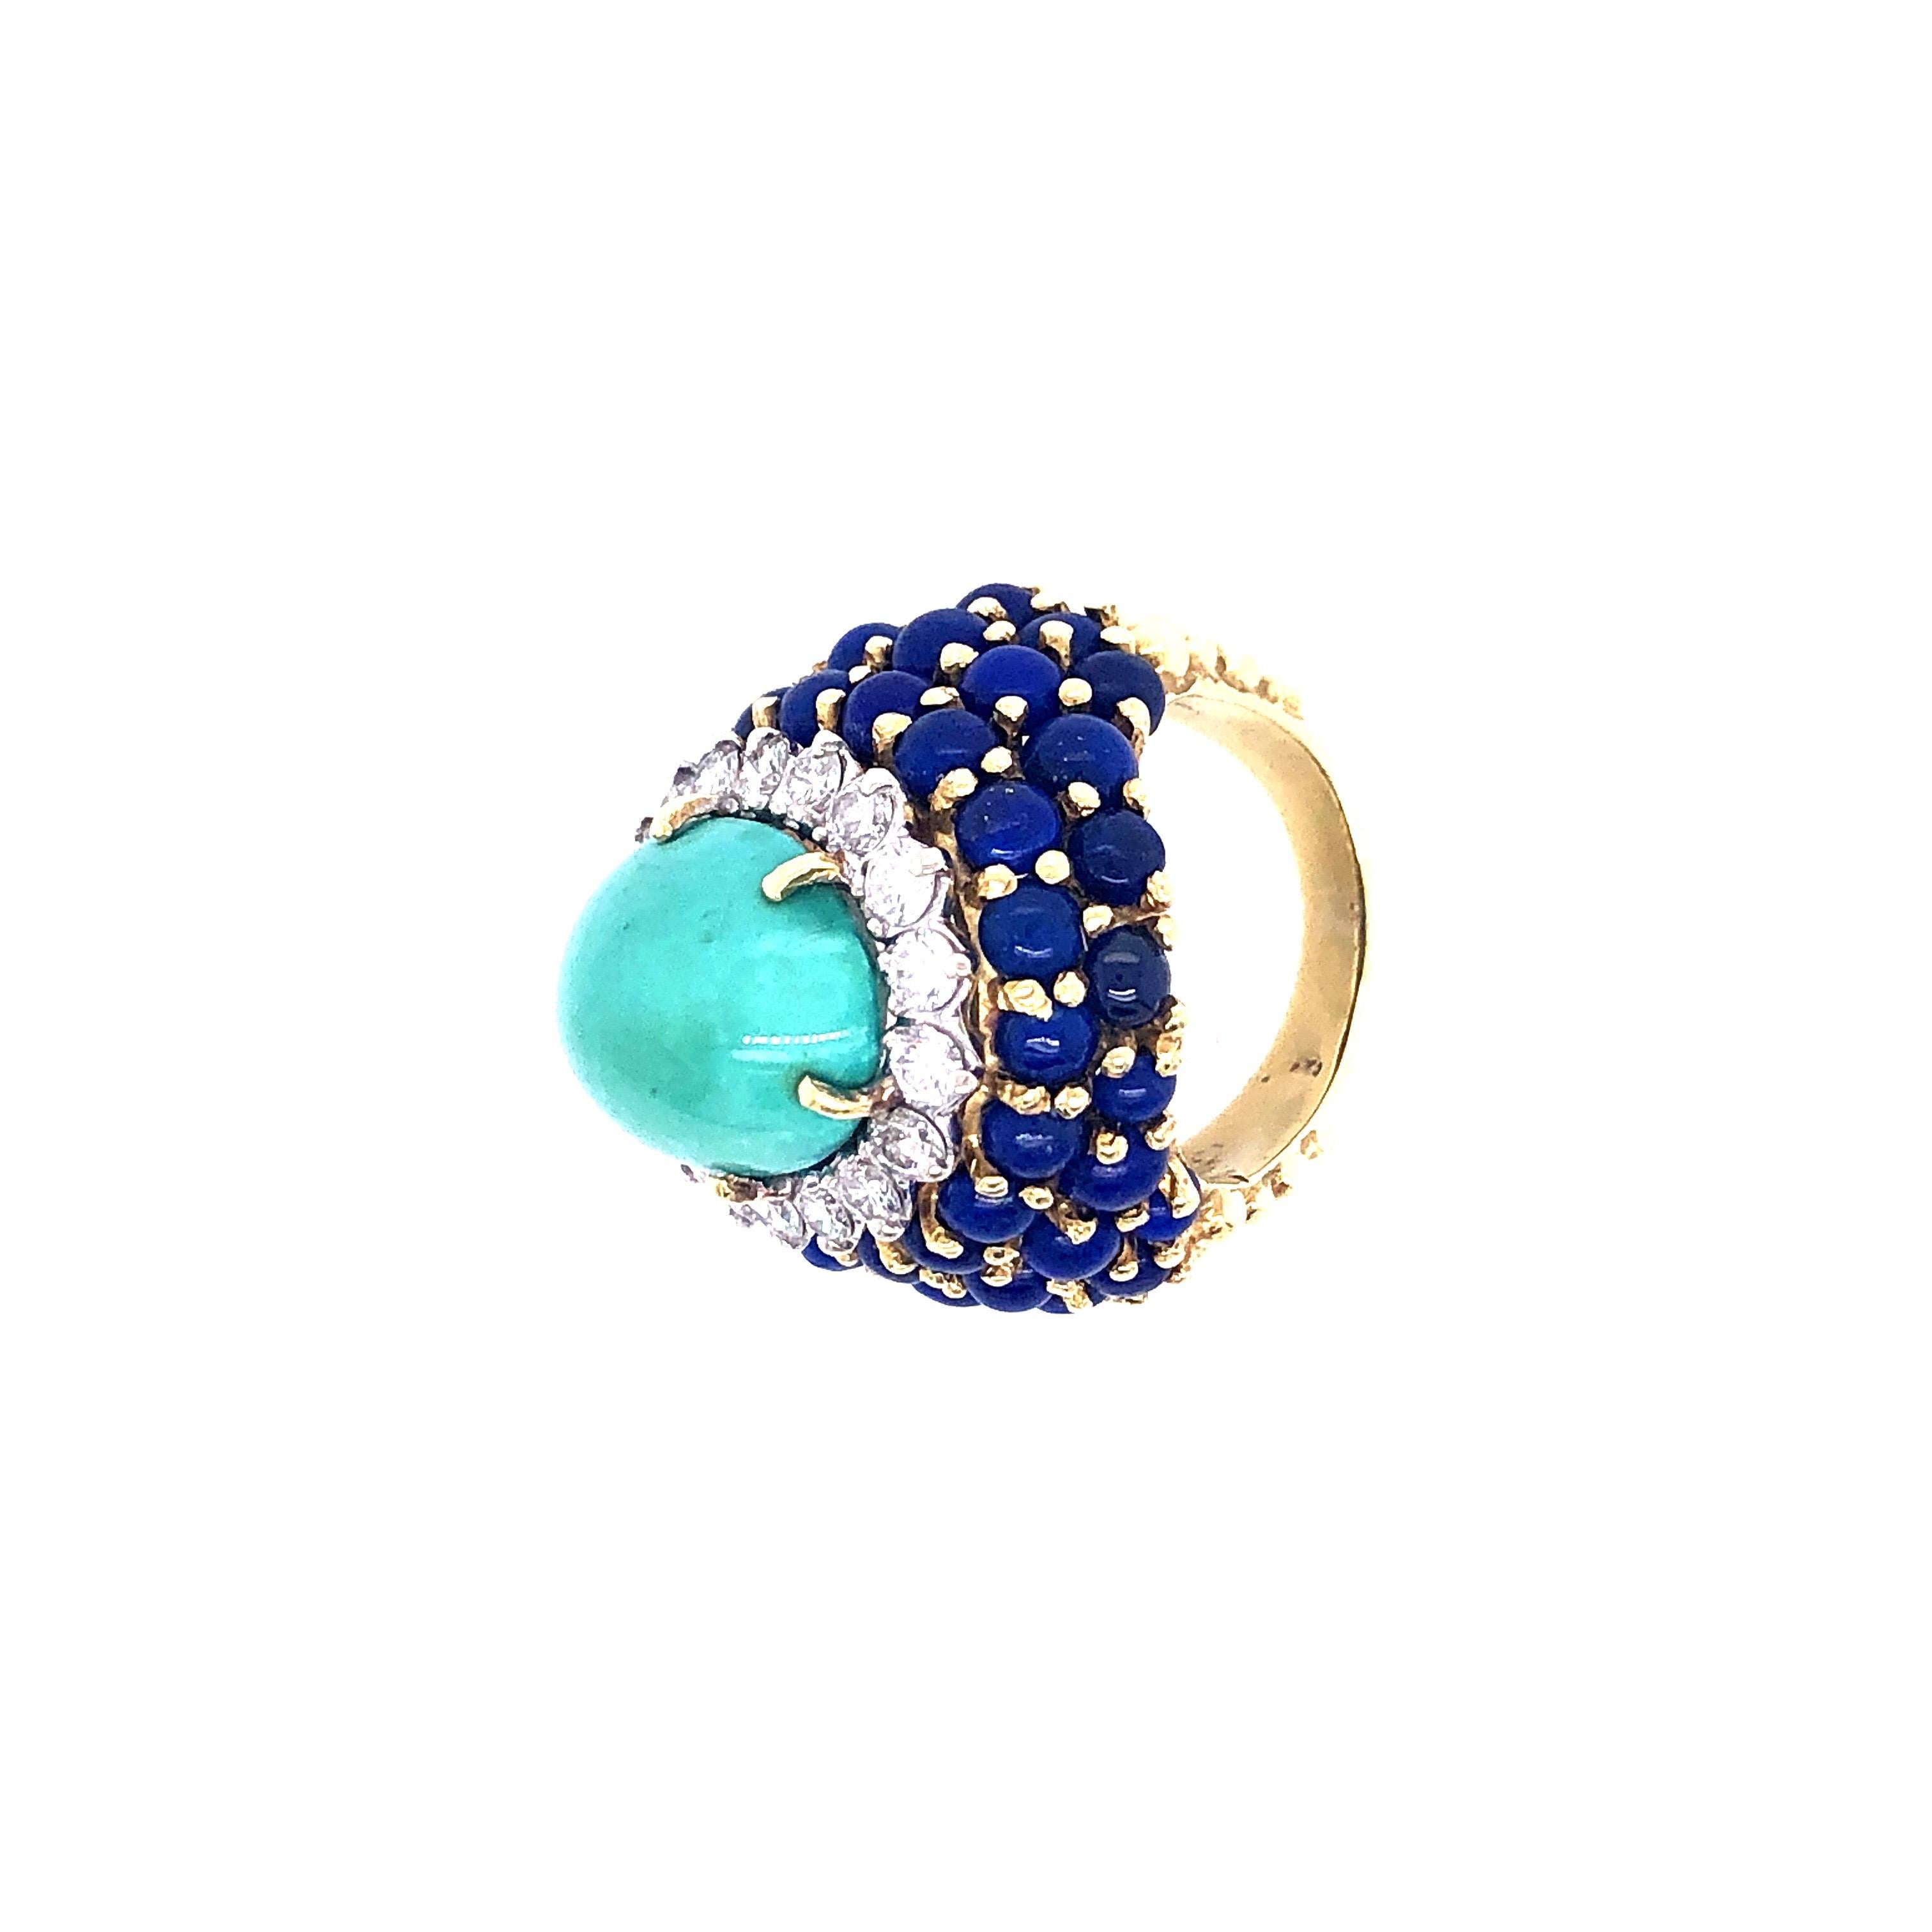 Turquoise Lapis and Diamond Ring. Size 6. Made by La Triomphe. Size 6 and can be sized. Elegant ring with a Turquoise center surrounding by round diamonds and lapis.Beading between the lapis and the shank set this piece off as a wow ring.